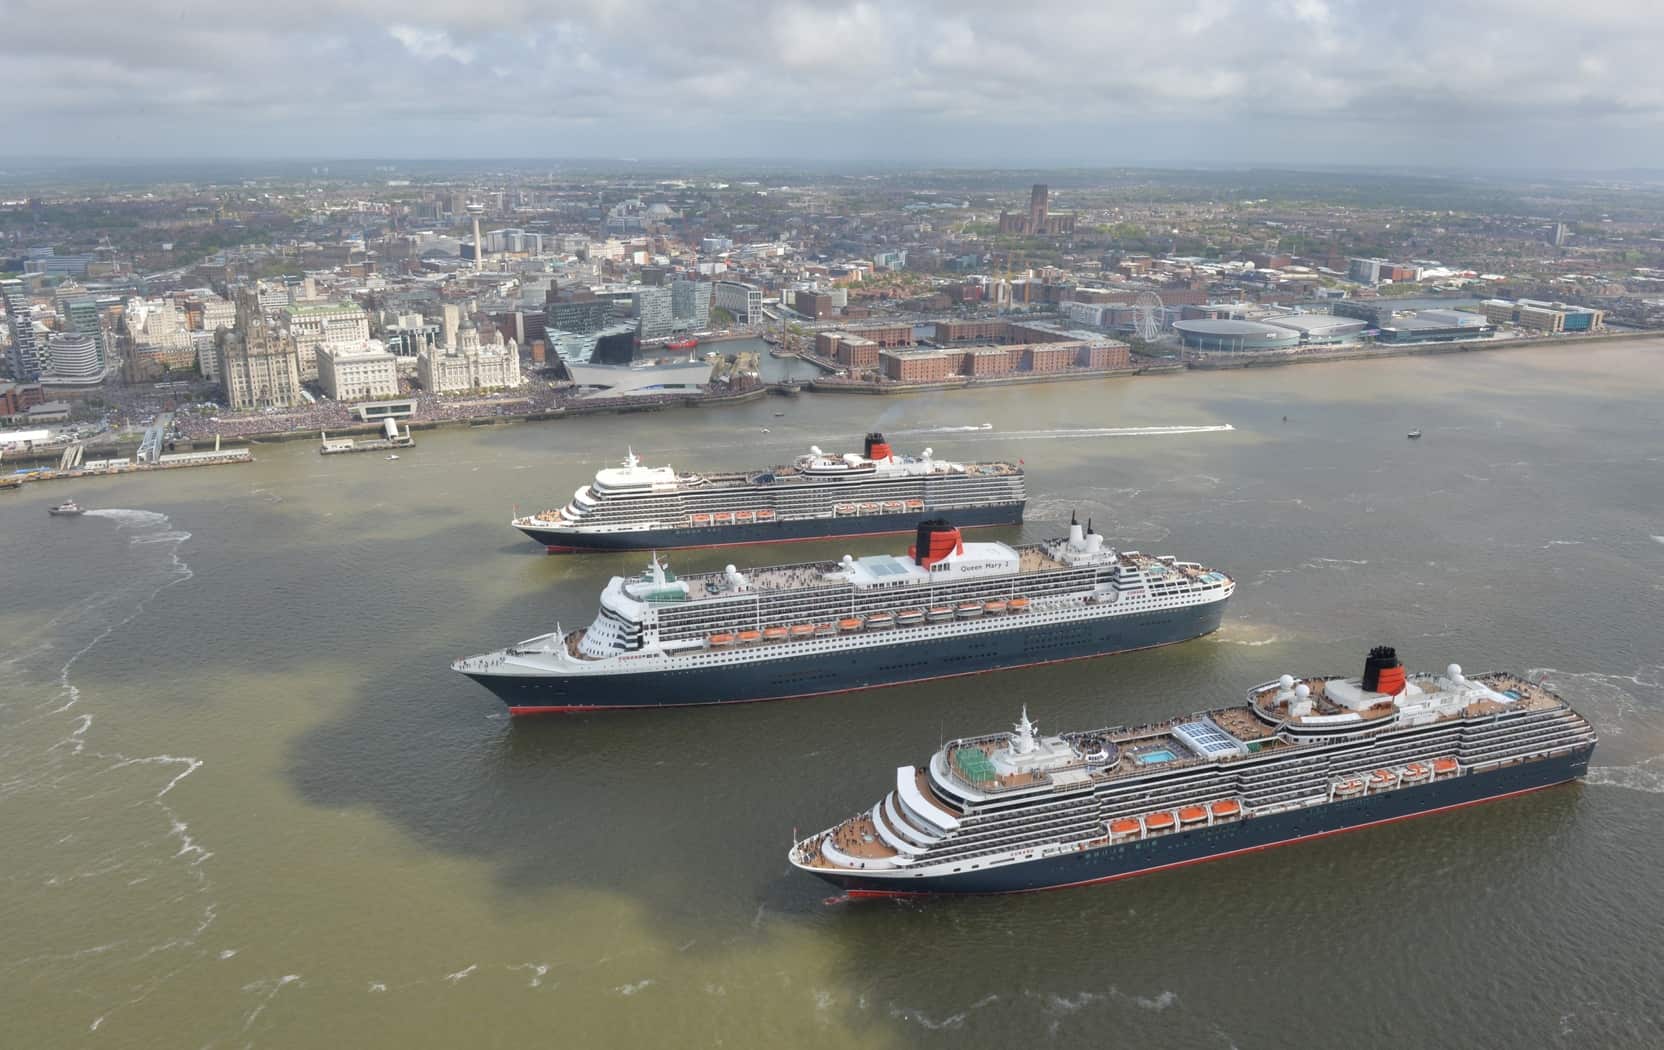 Cunard’s Three Queens Perform River Dance on the Mersey in Salute to Liverpool Where the Company Began 175 Years Ago | 28